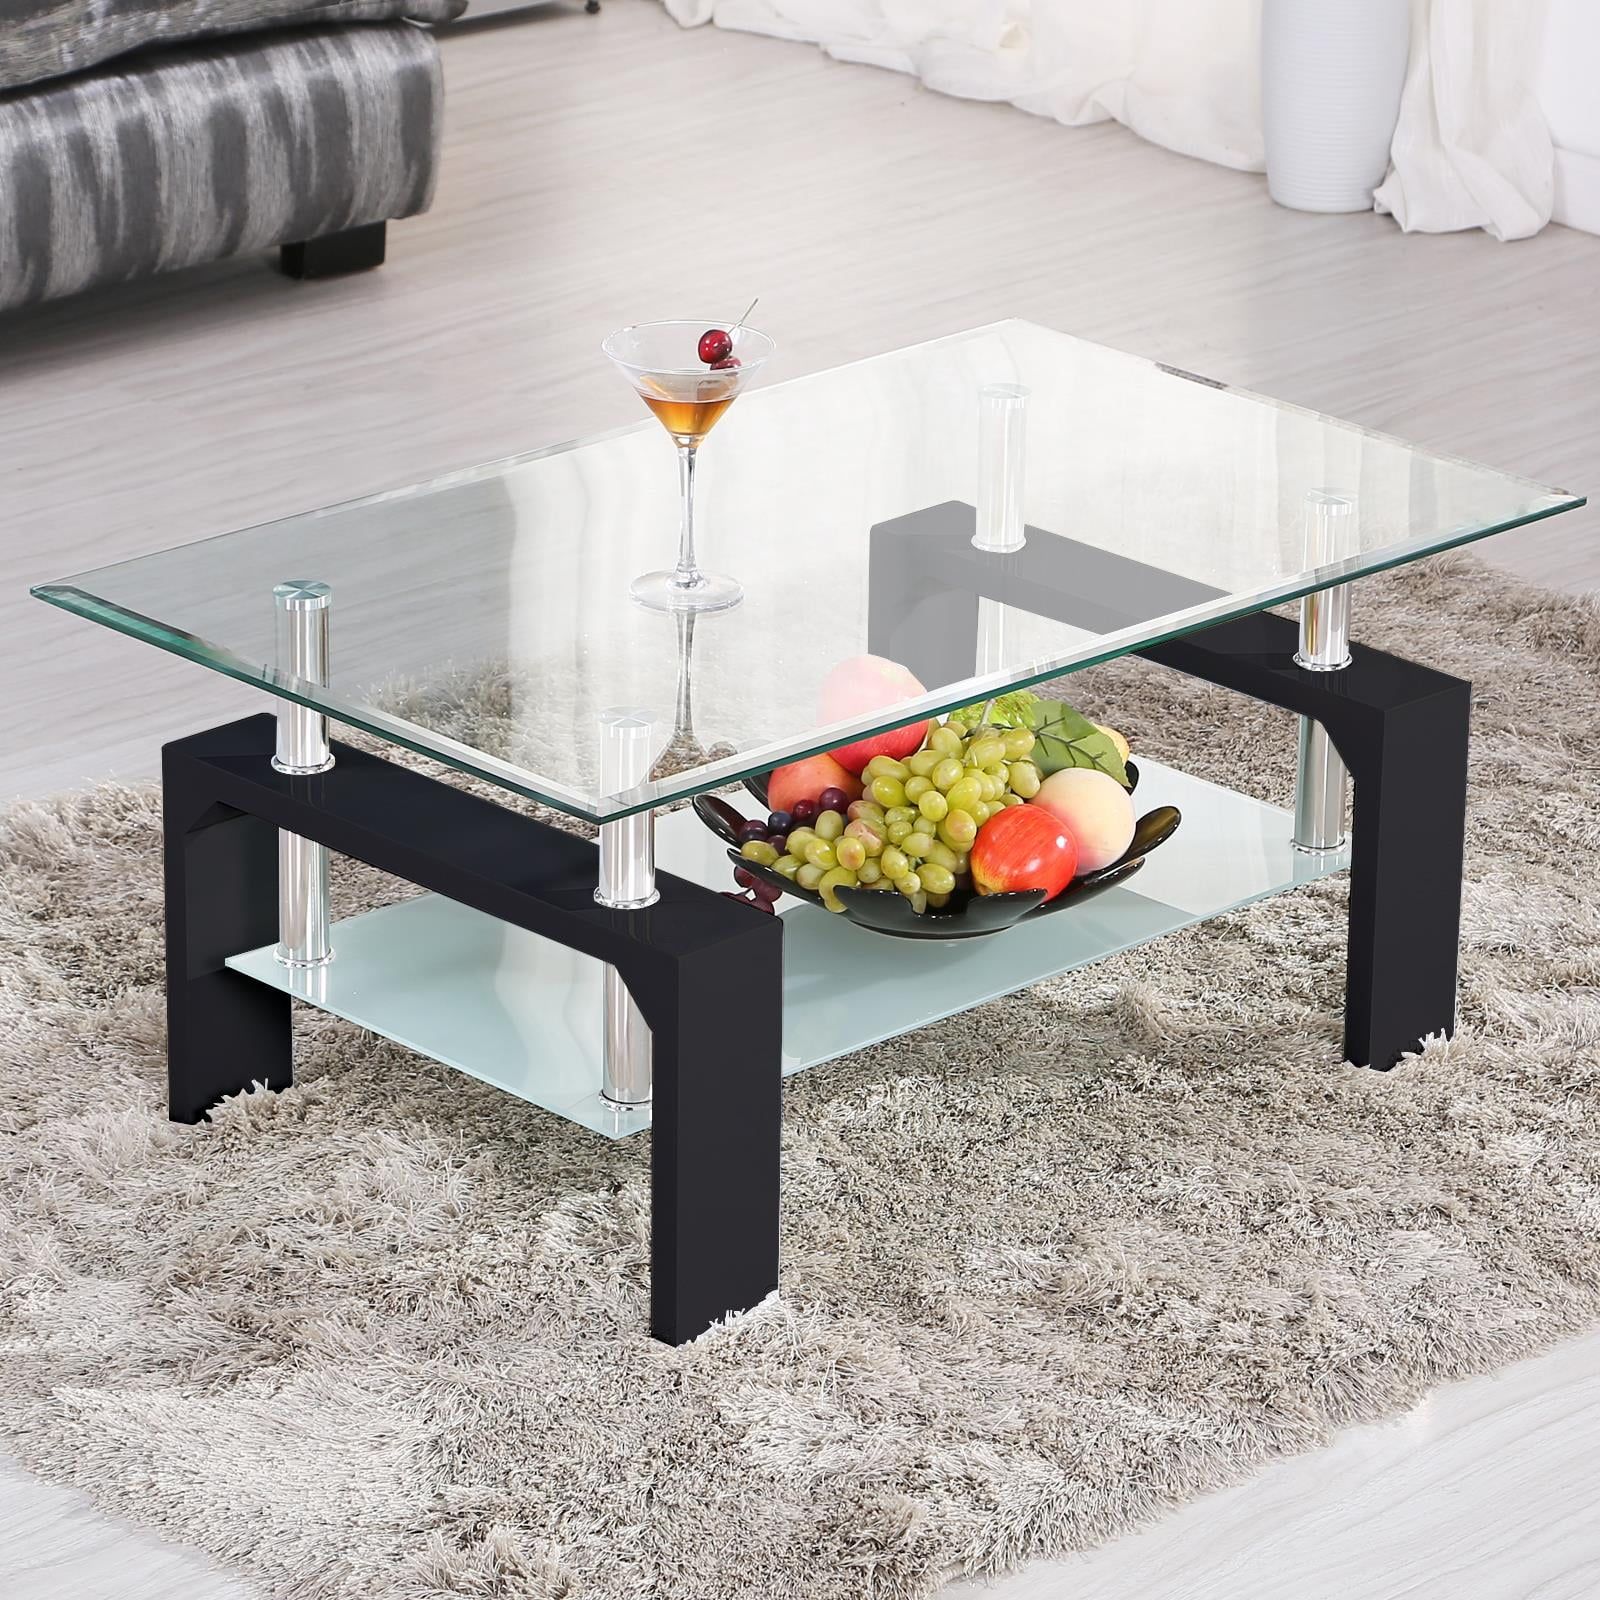 Ktaxon Rectangular Glass Coffee Table Shelf Wood Living Room Furniture Pertaining To Rectangular Coffee Tables With Pedestal Bases (Gallery 13 of 20)